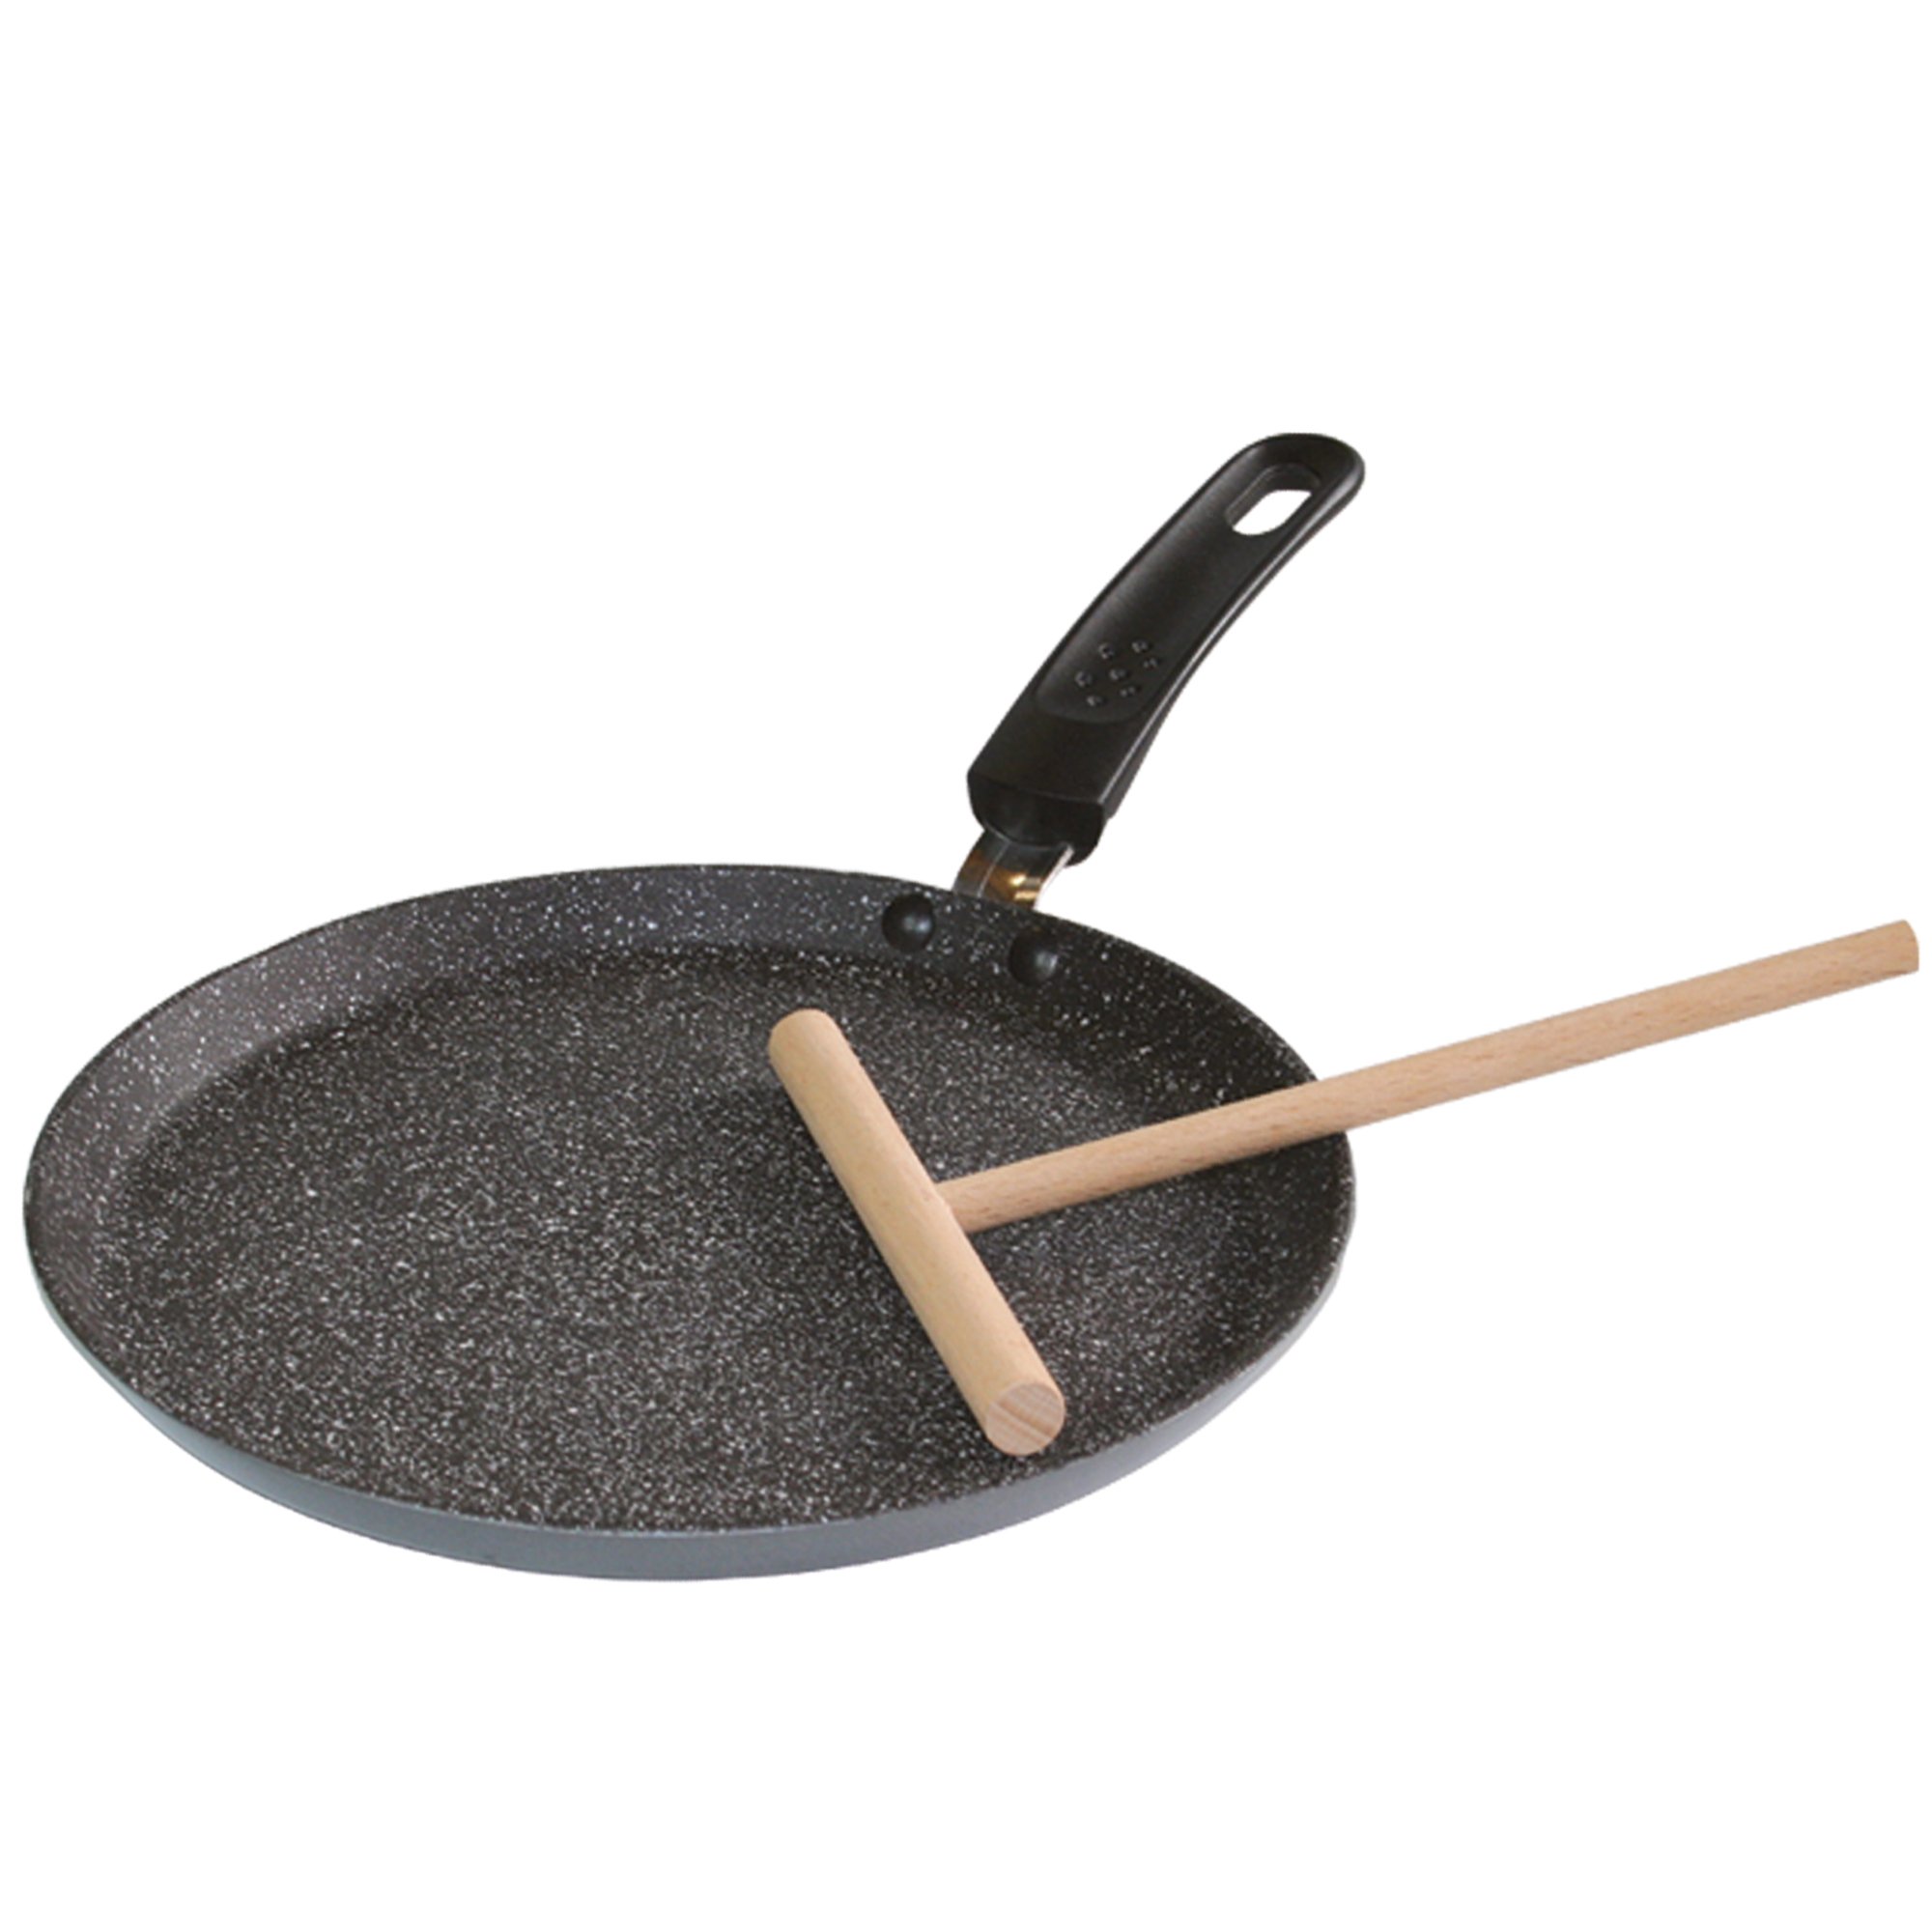 STONELINE® Crepe Pan 25 cm, with Batter Spreader, Flat Non-Stick Pan